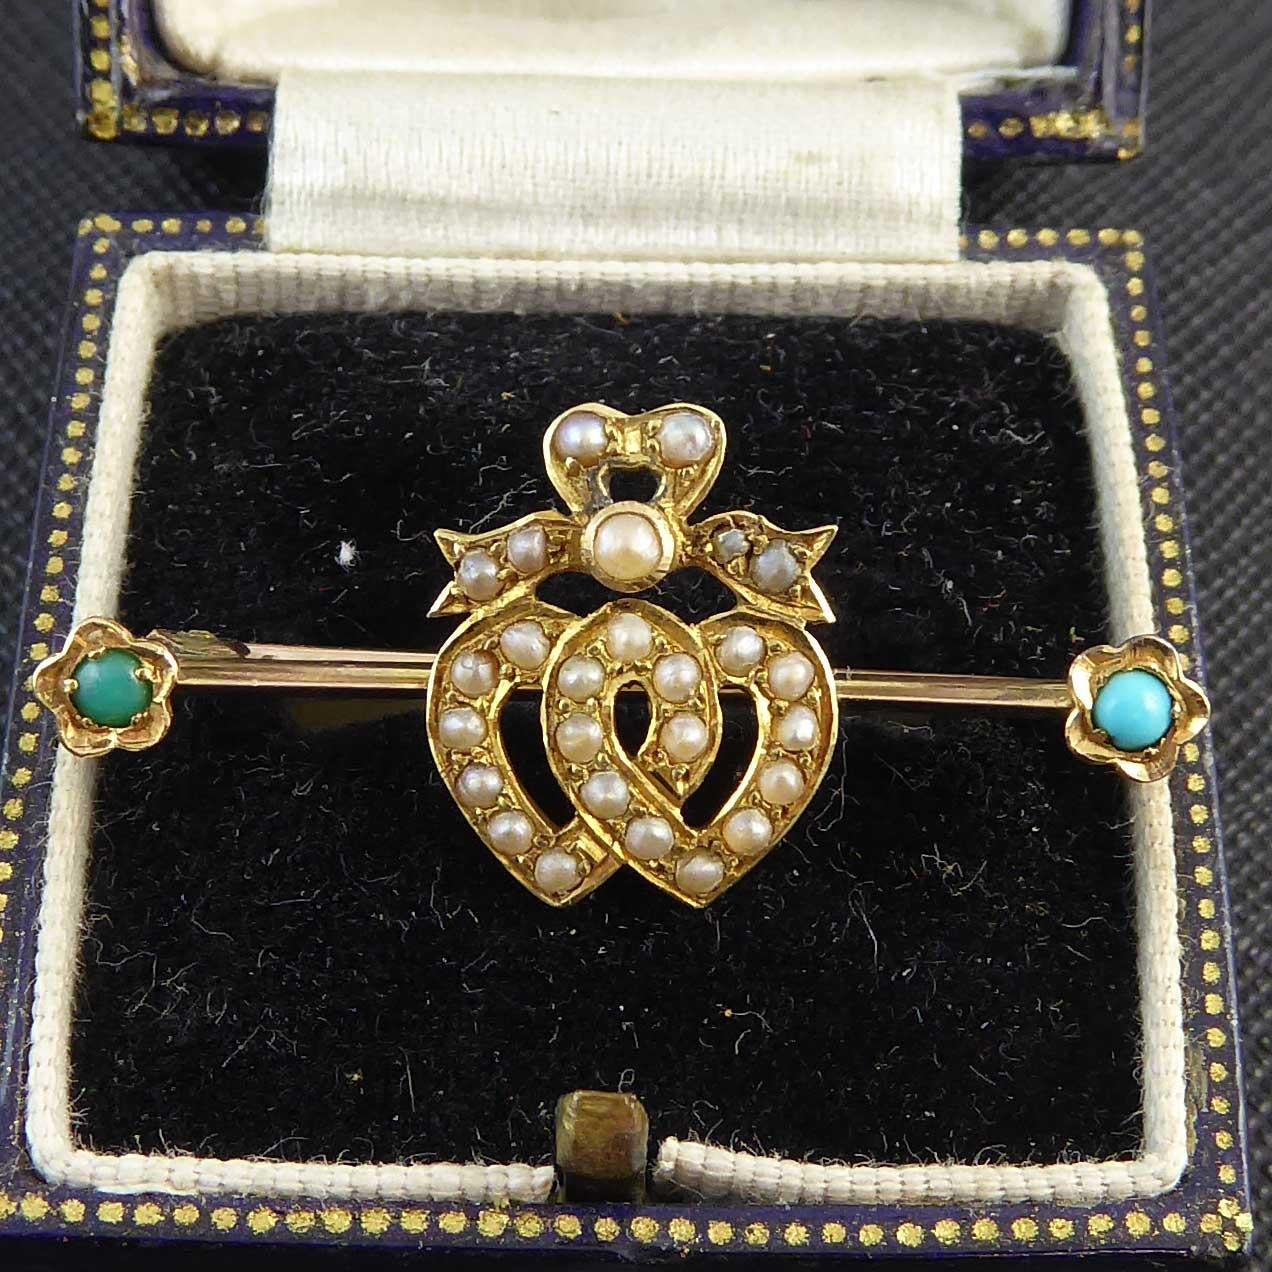 A charming and romantic brooch dating from the Victorian era featuring two pearl studded hearts entwined on a yellow gold knife edge bar.  The top of the hearts a crowned with a pearl ribbon and there are cabochon turquoise set flowers as finials to